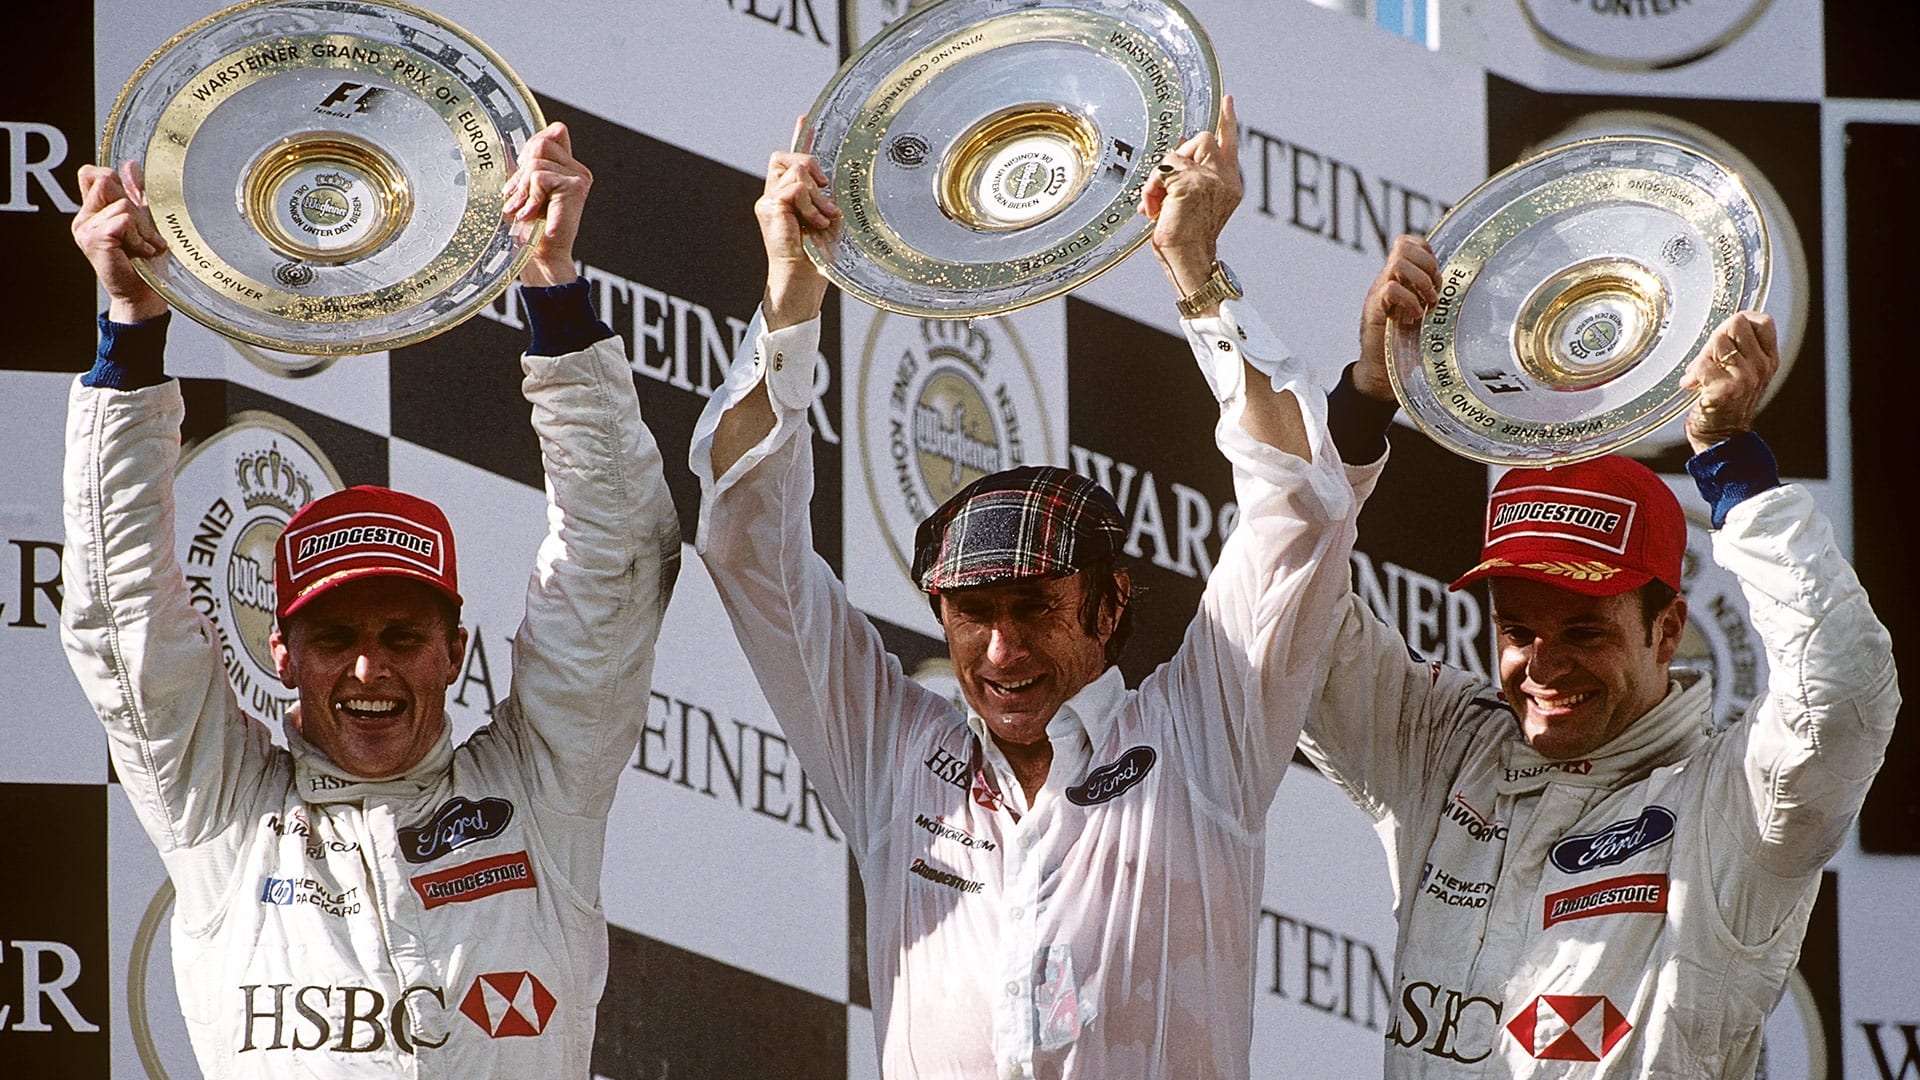 WATCH LIVE Join our full race stream of Johnny Herberts incredible 1999 European GP win Formula 1®